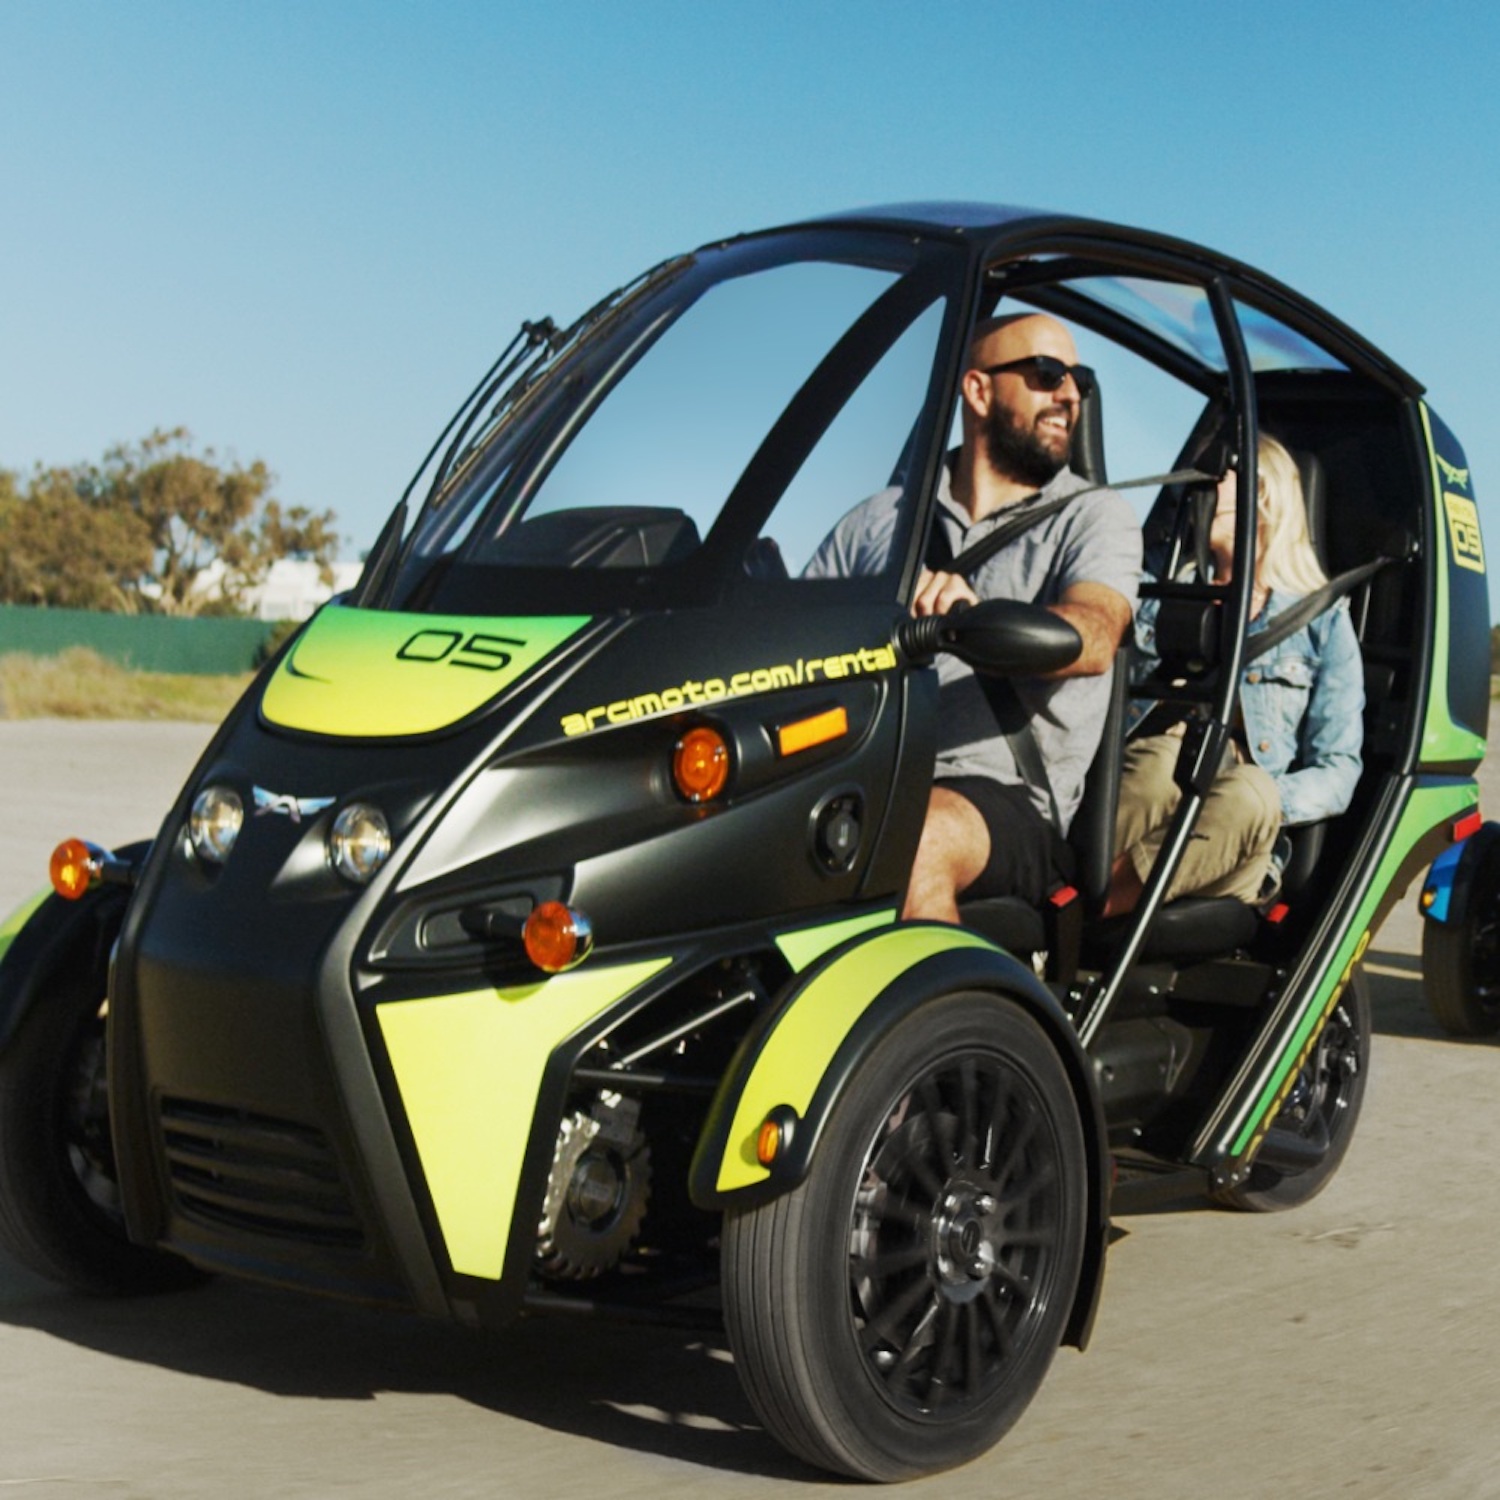 A view of the three-wheeled vehicles owned by Arcimoto Inc.